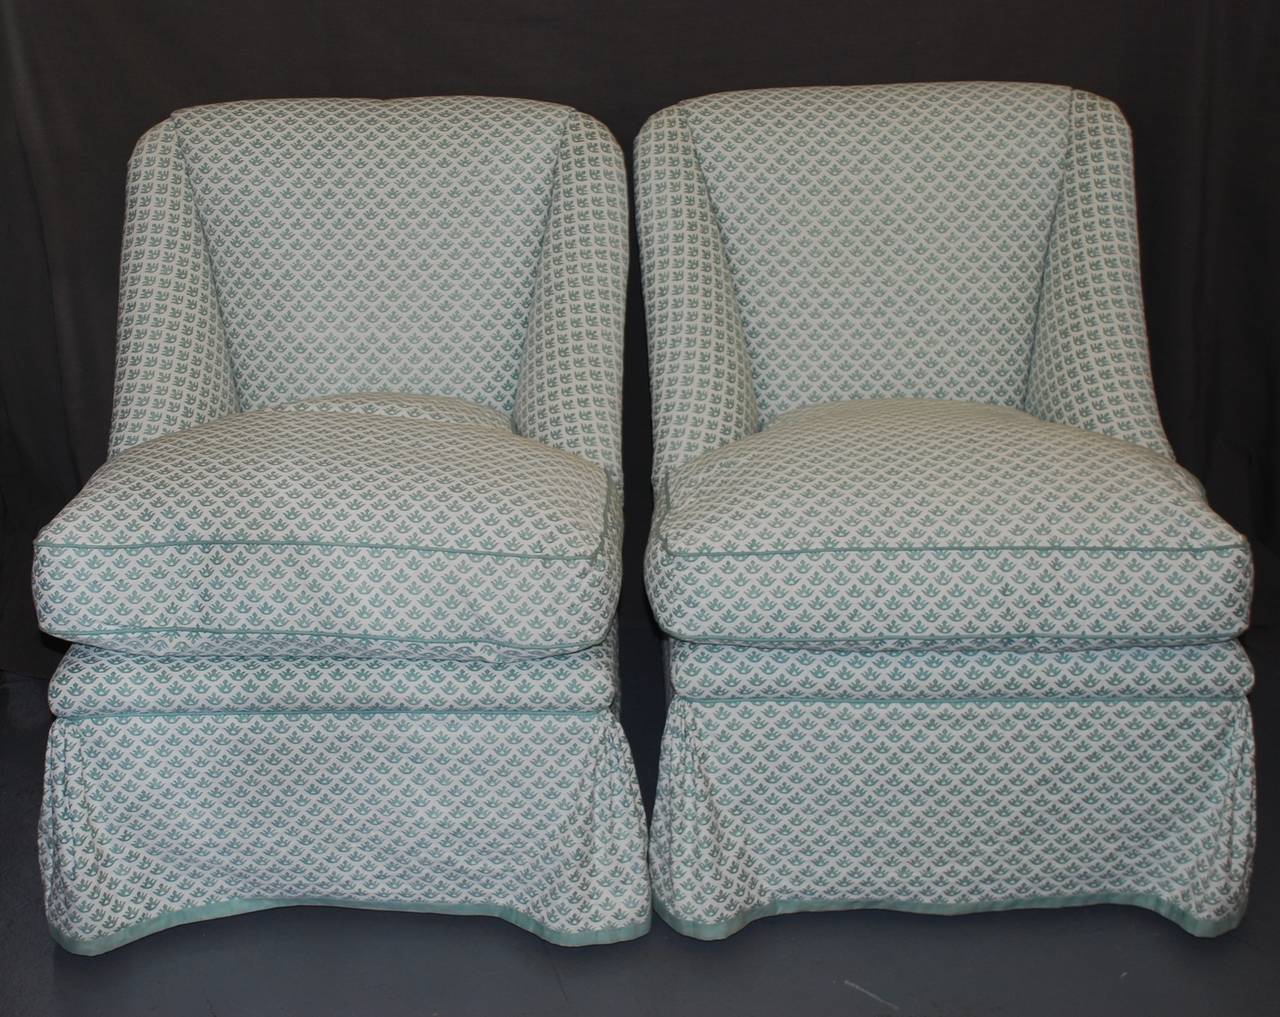 Pair of Fortuny cotton club chairs with down and feather seat cushion. 
Dimension: 30